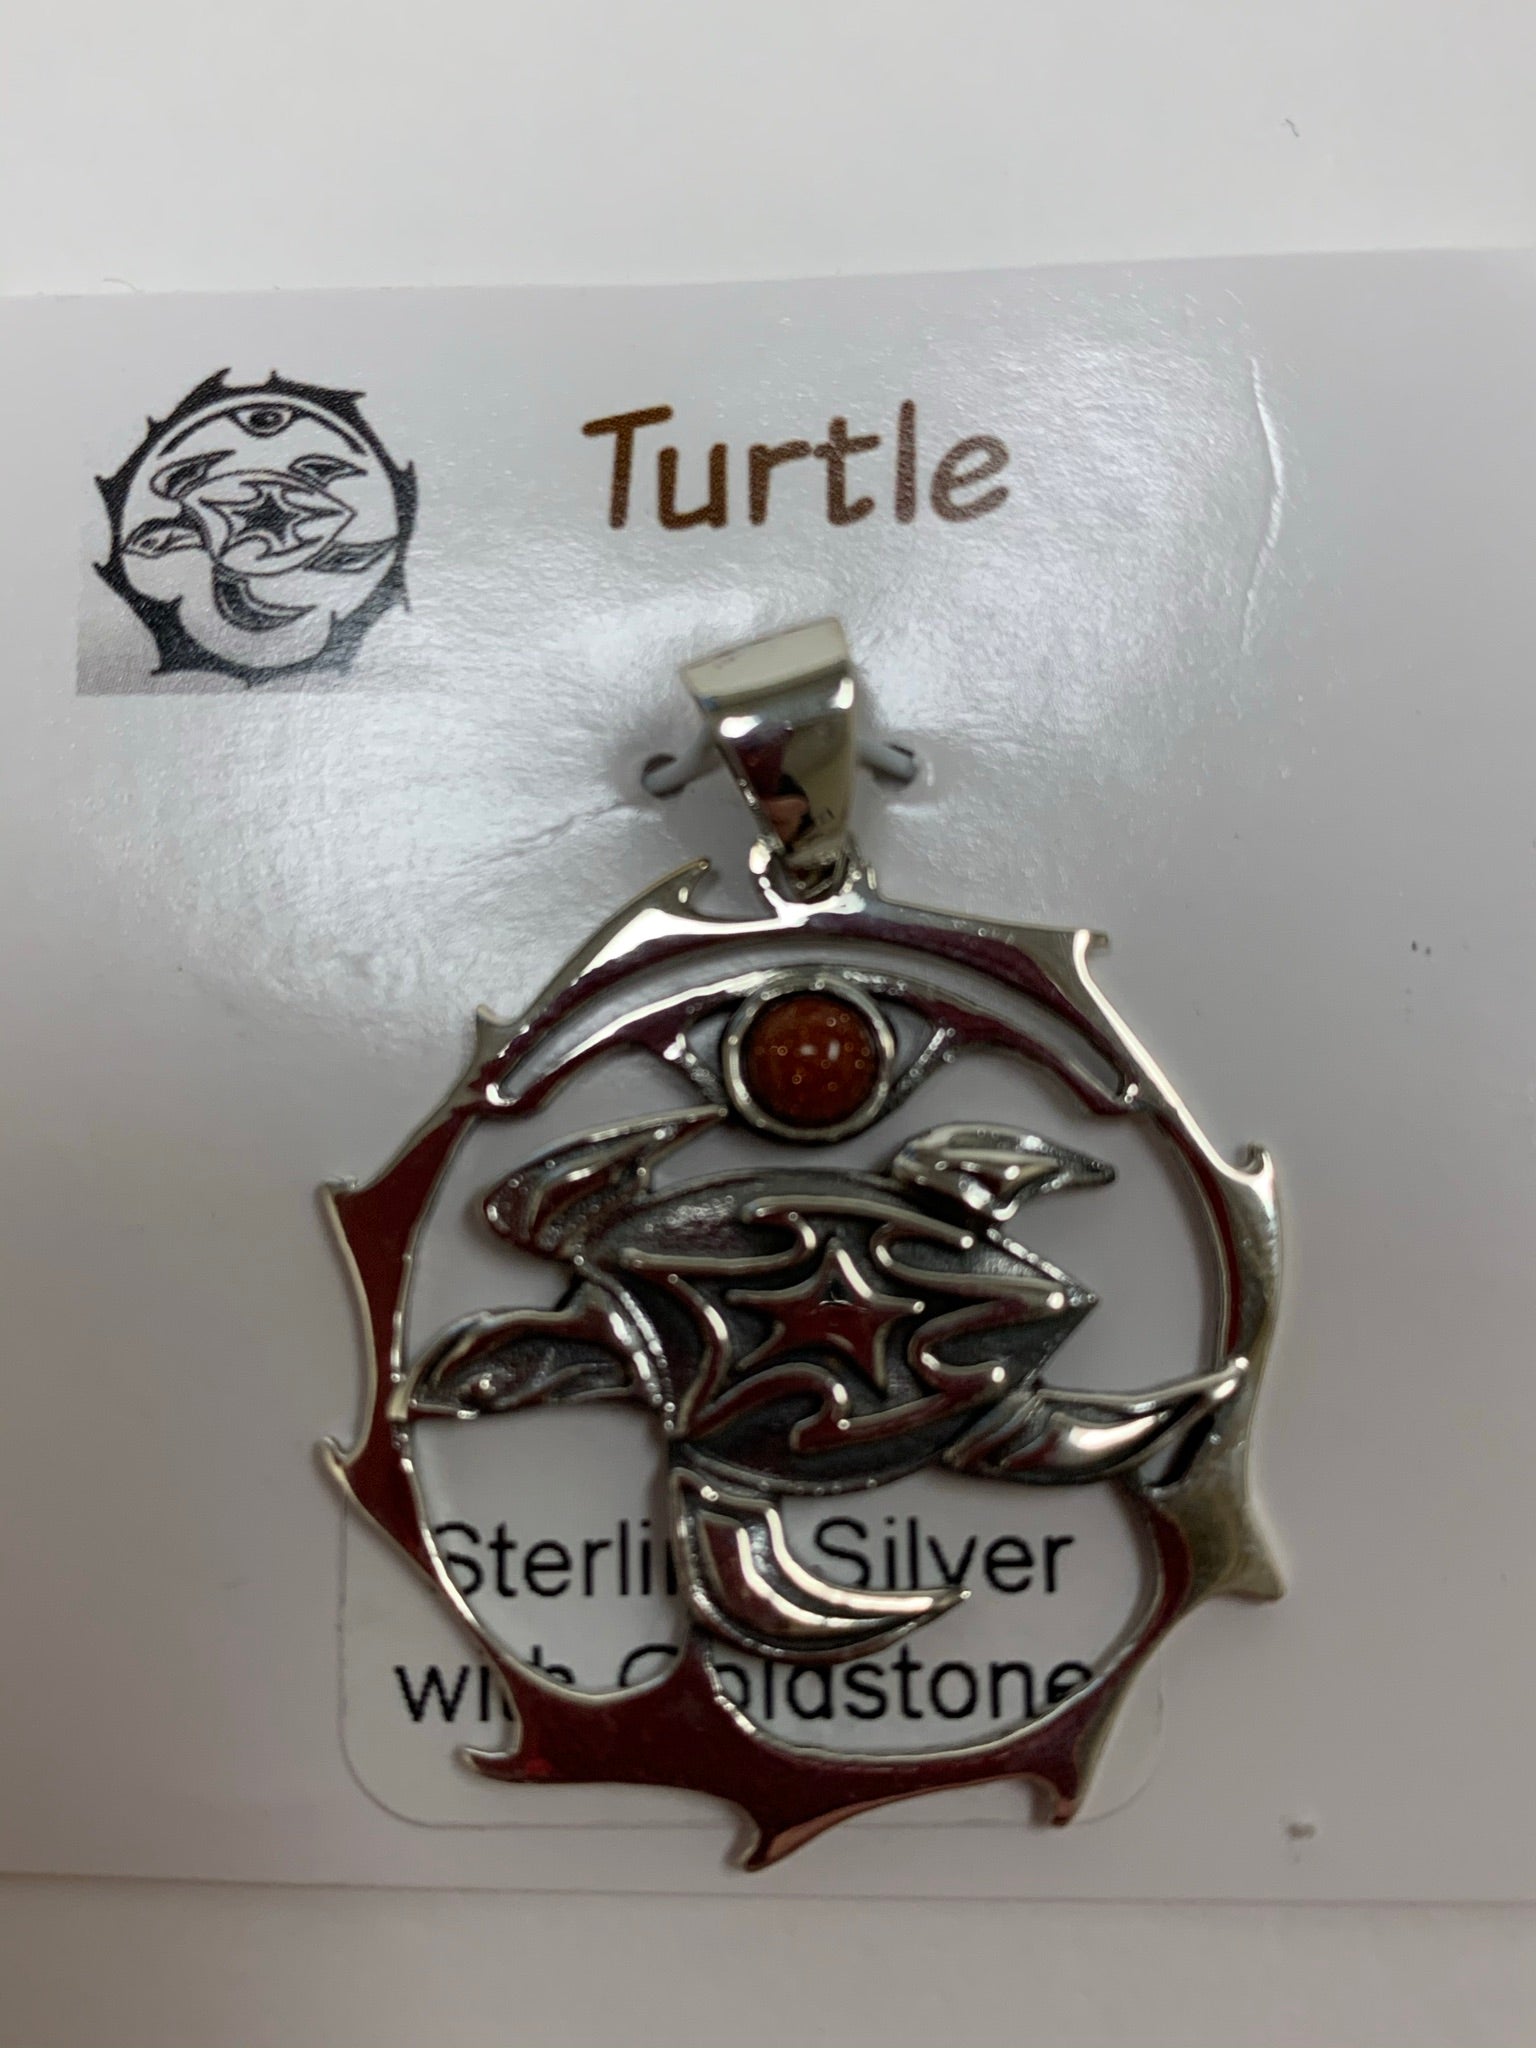 Close-up view of the sterling silver sea turtle spirit animal pendant with goldstone. Sea turtle is set within a stylized silver circle, with the goldstone above it. Where your spirit animal upon your chest so its energy is with you everywhere you go. Pendant only - necklace chain not included.